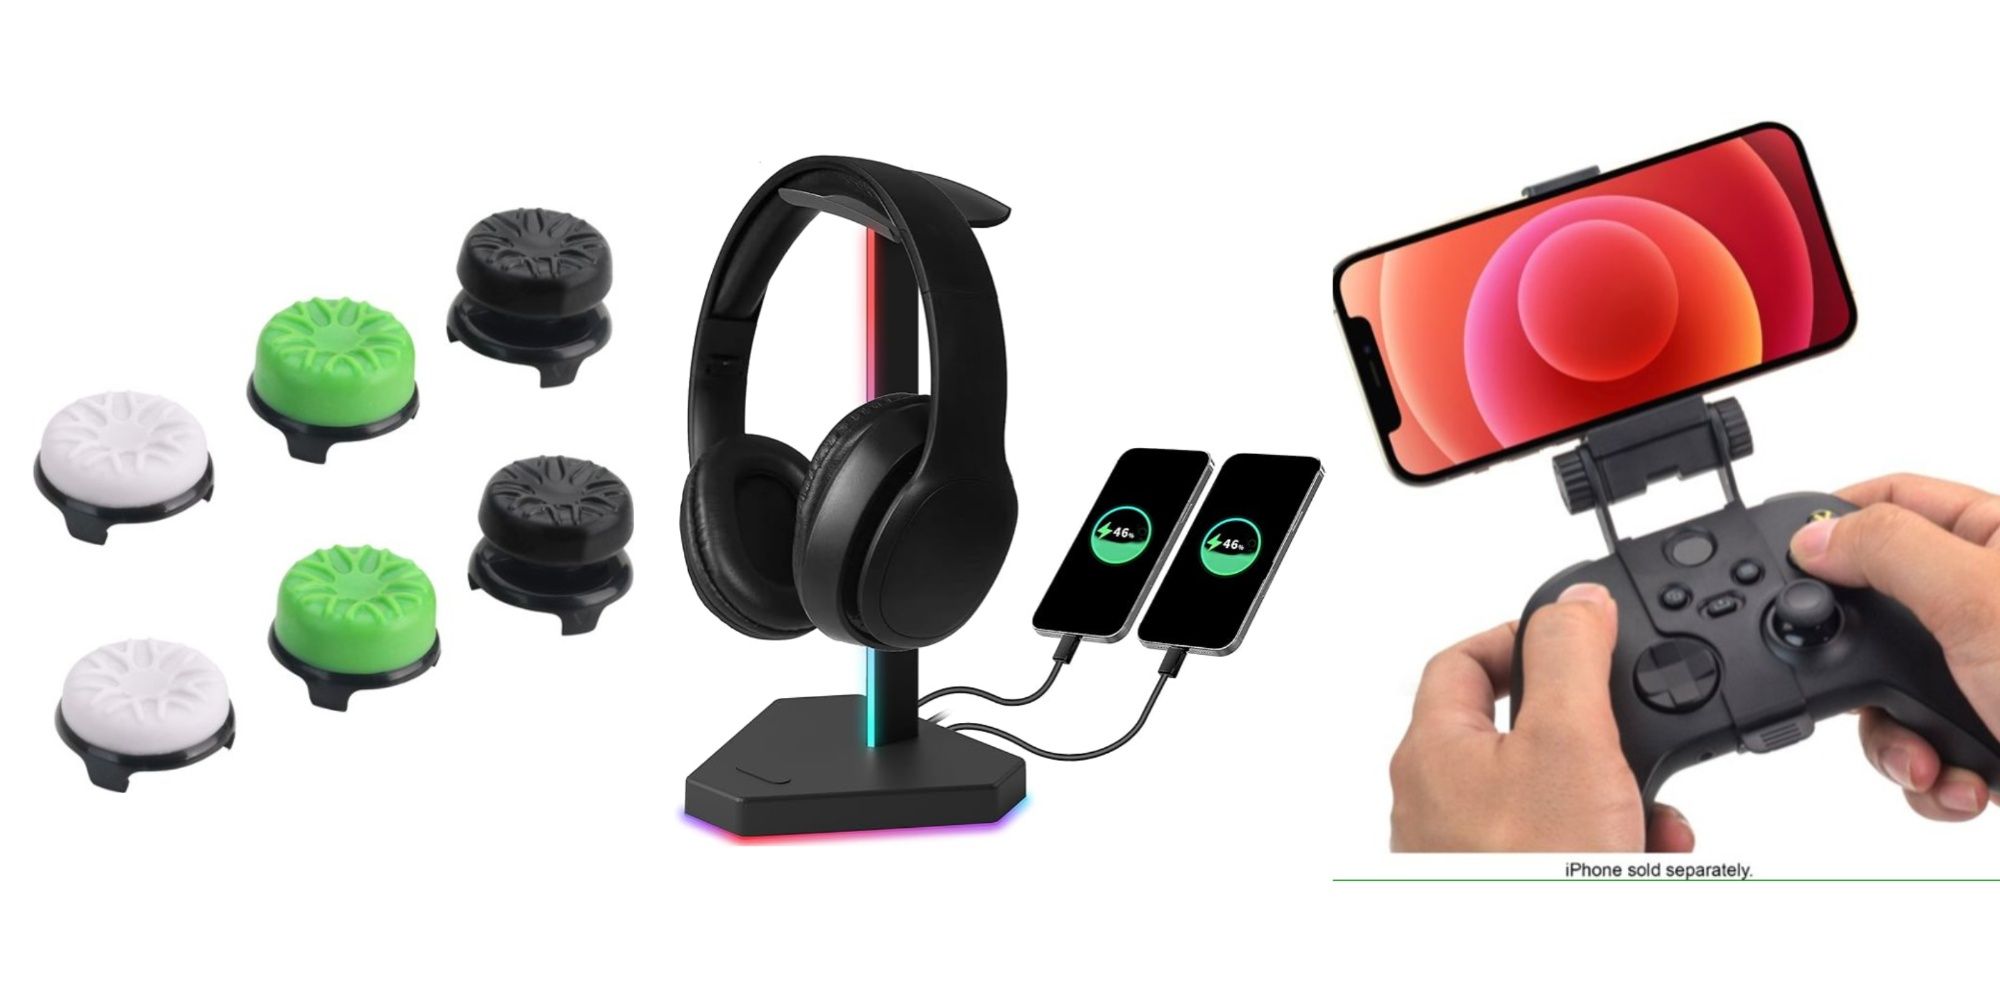 A picture of thumb sicks, a headphone holder and phone holder on an xbox controller side by side